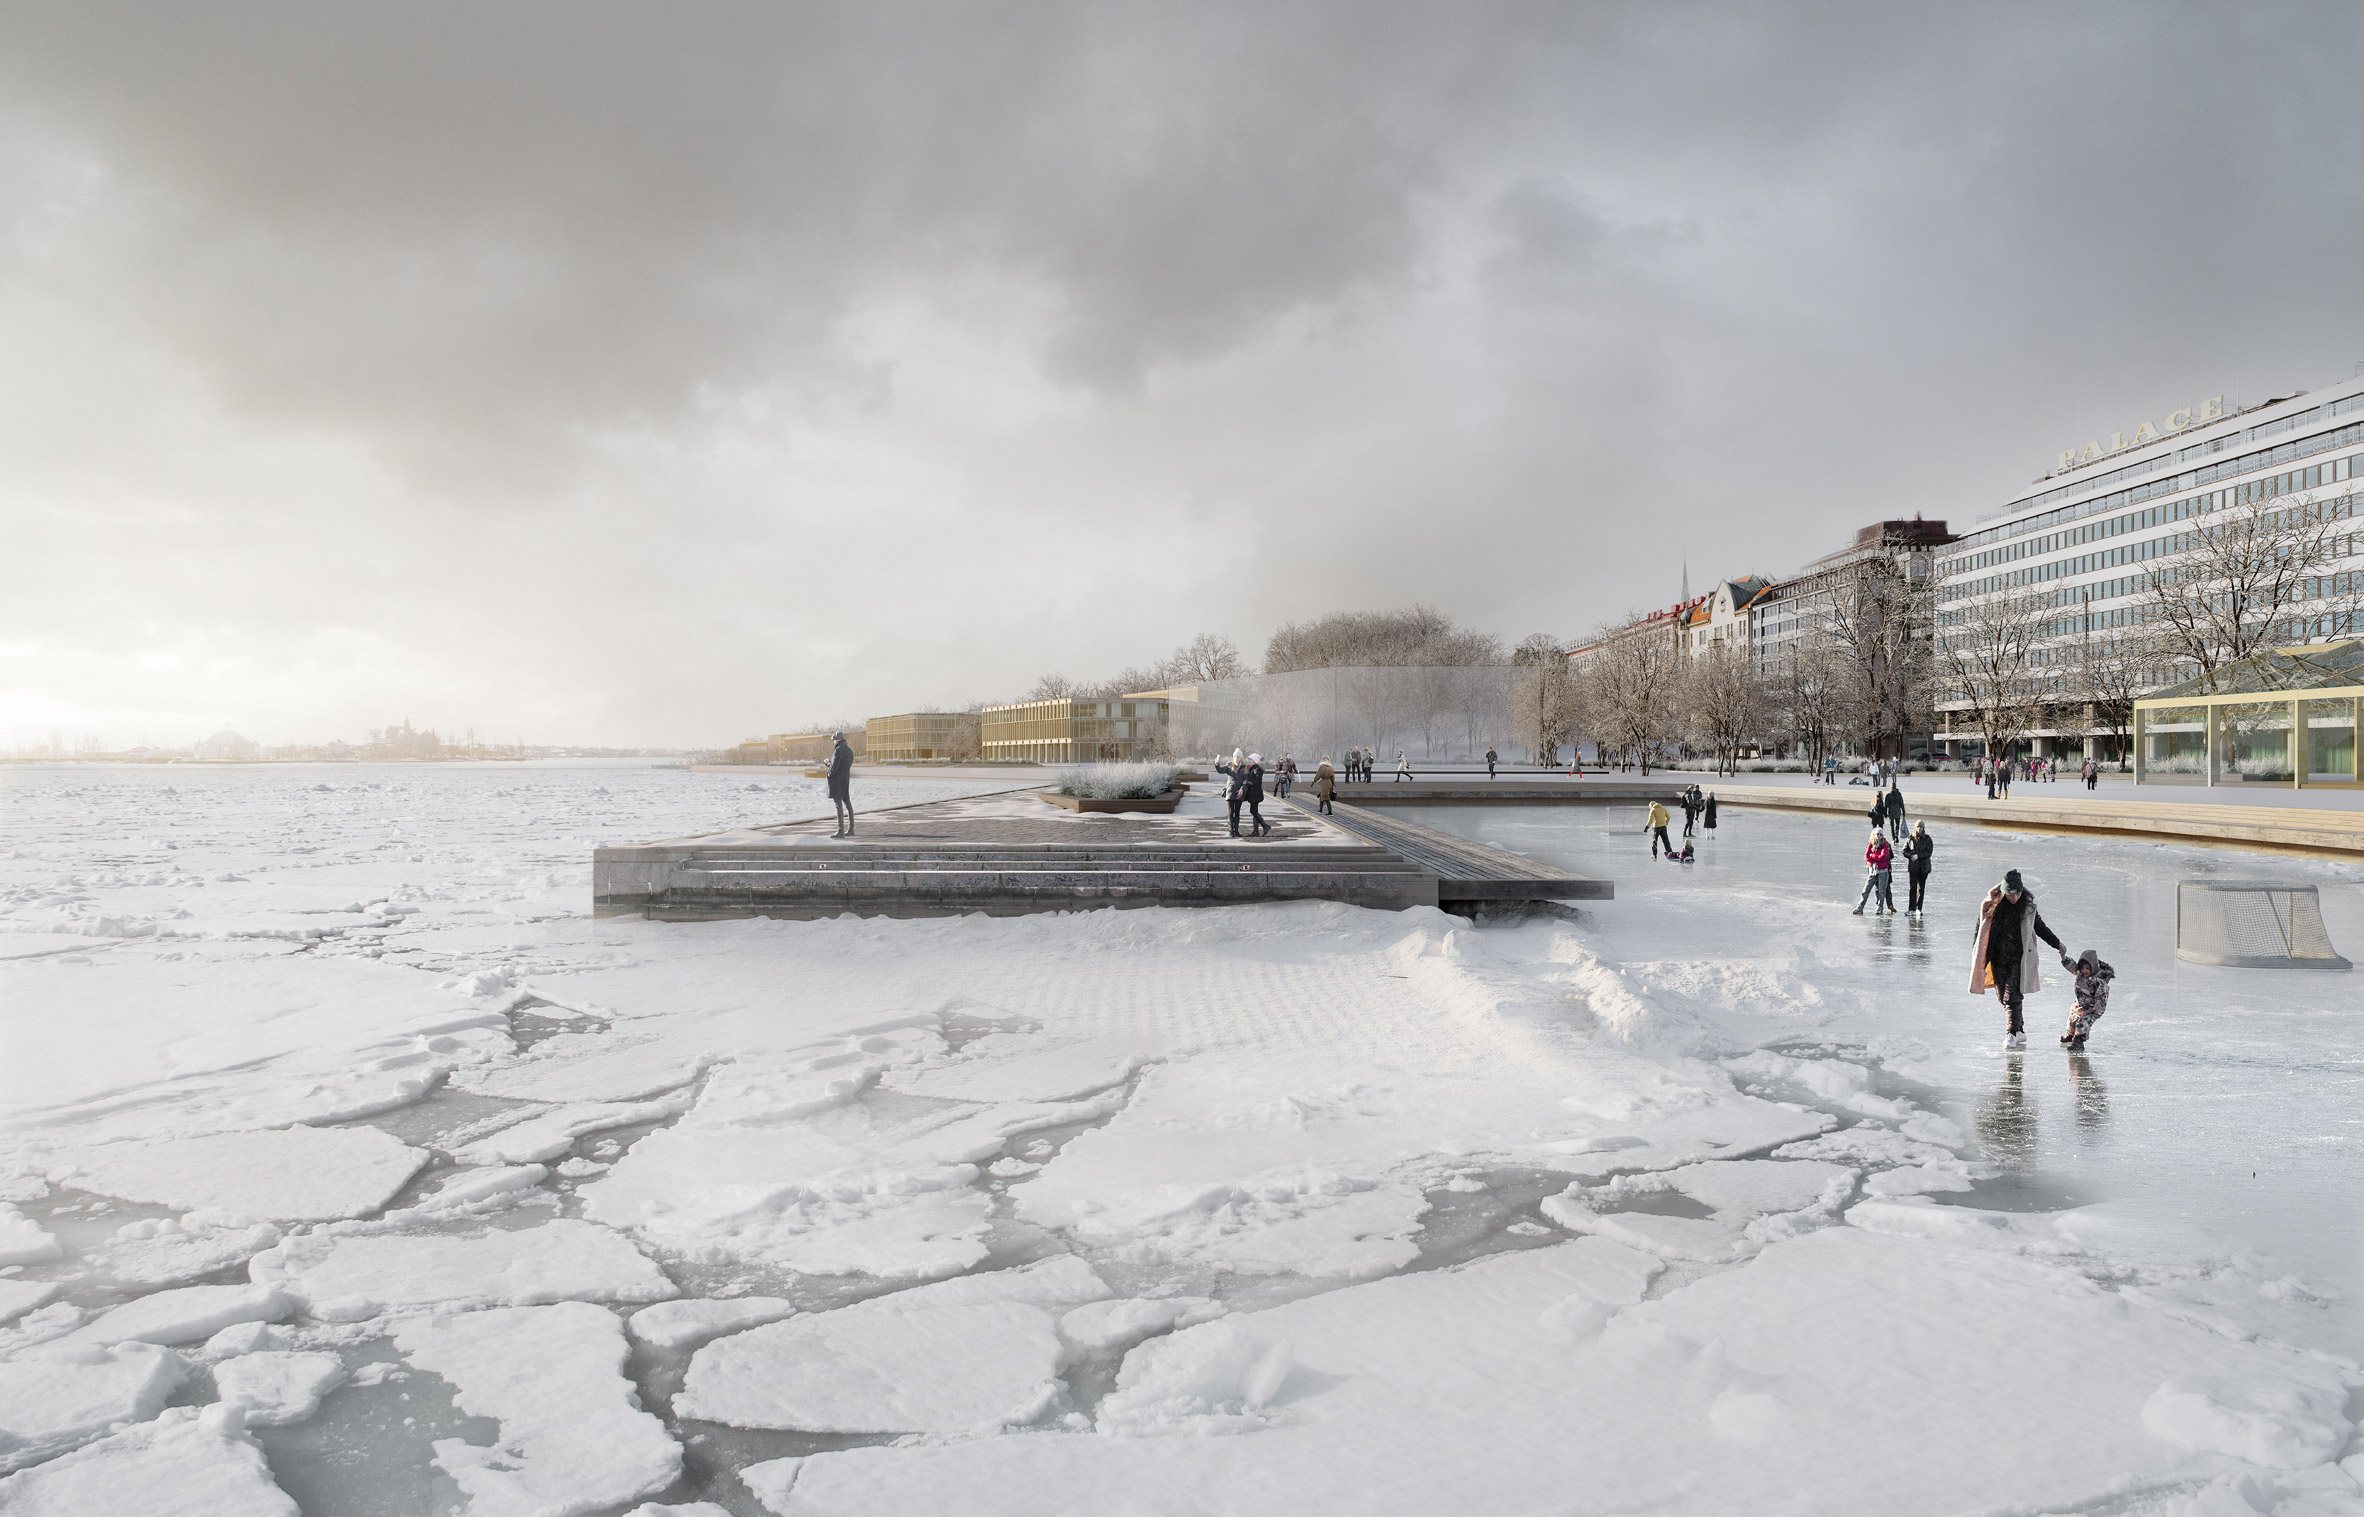 Rendering of people walking around public squares by a frozen harbour, with people ice-skating on a small inlet